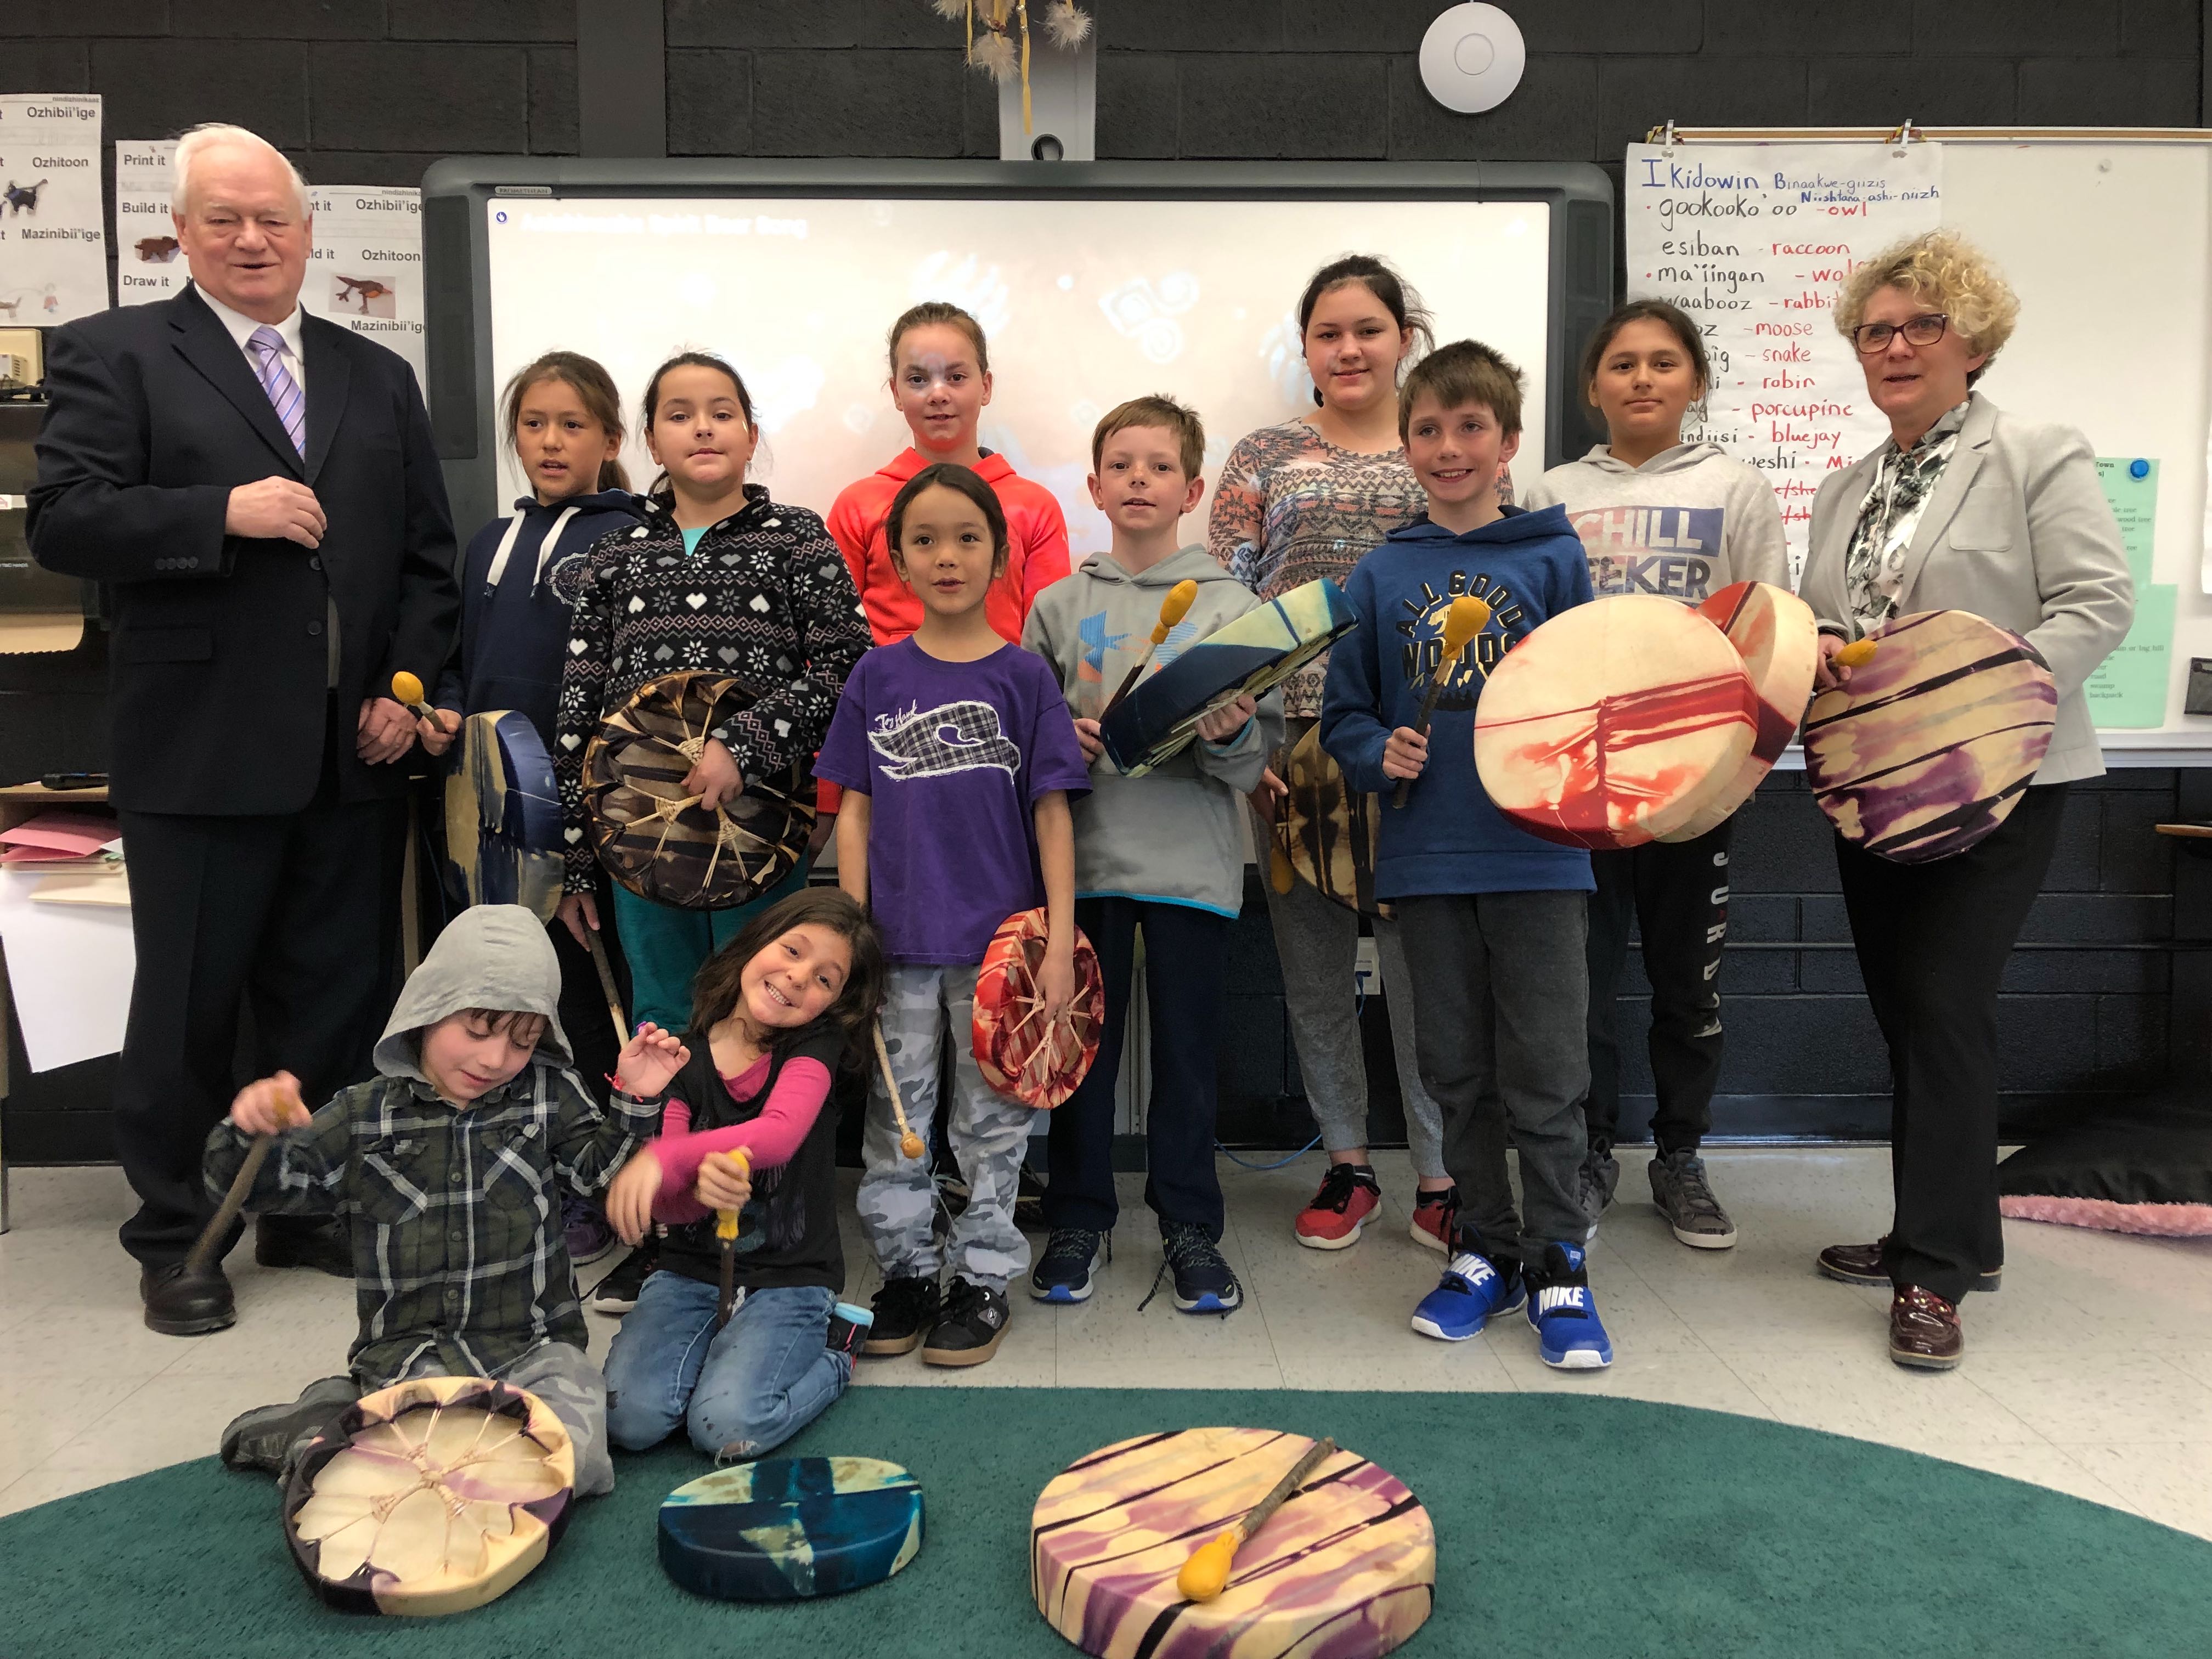 John MacEachern (left), Mayor of Manitouwadge, and Laurie Swami (right), President and CEO of the NWMO, visit a classroom at Our Lady of Lourdes Catholic School, where an NWMO investment has helped support the purchase of traditional drums.